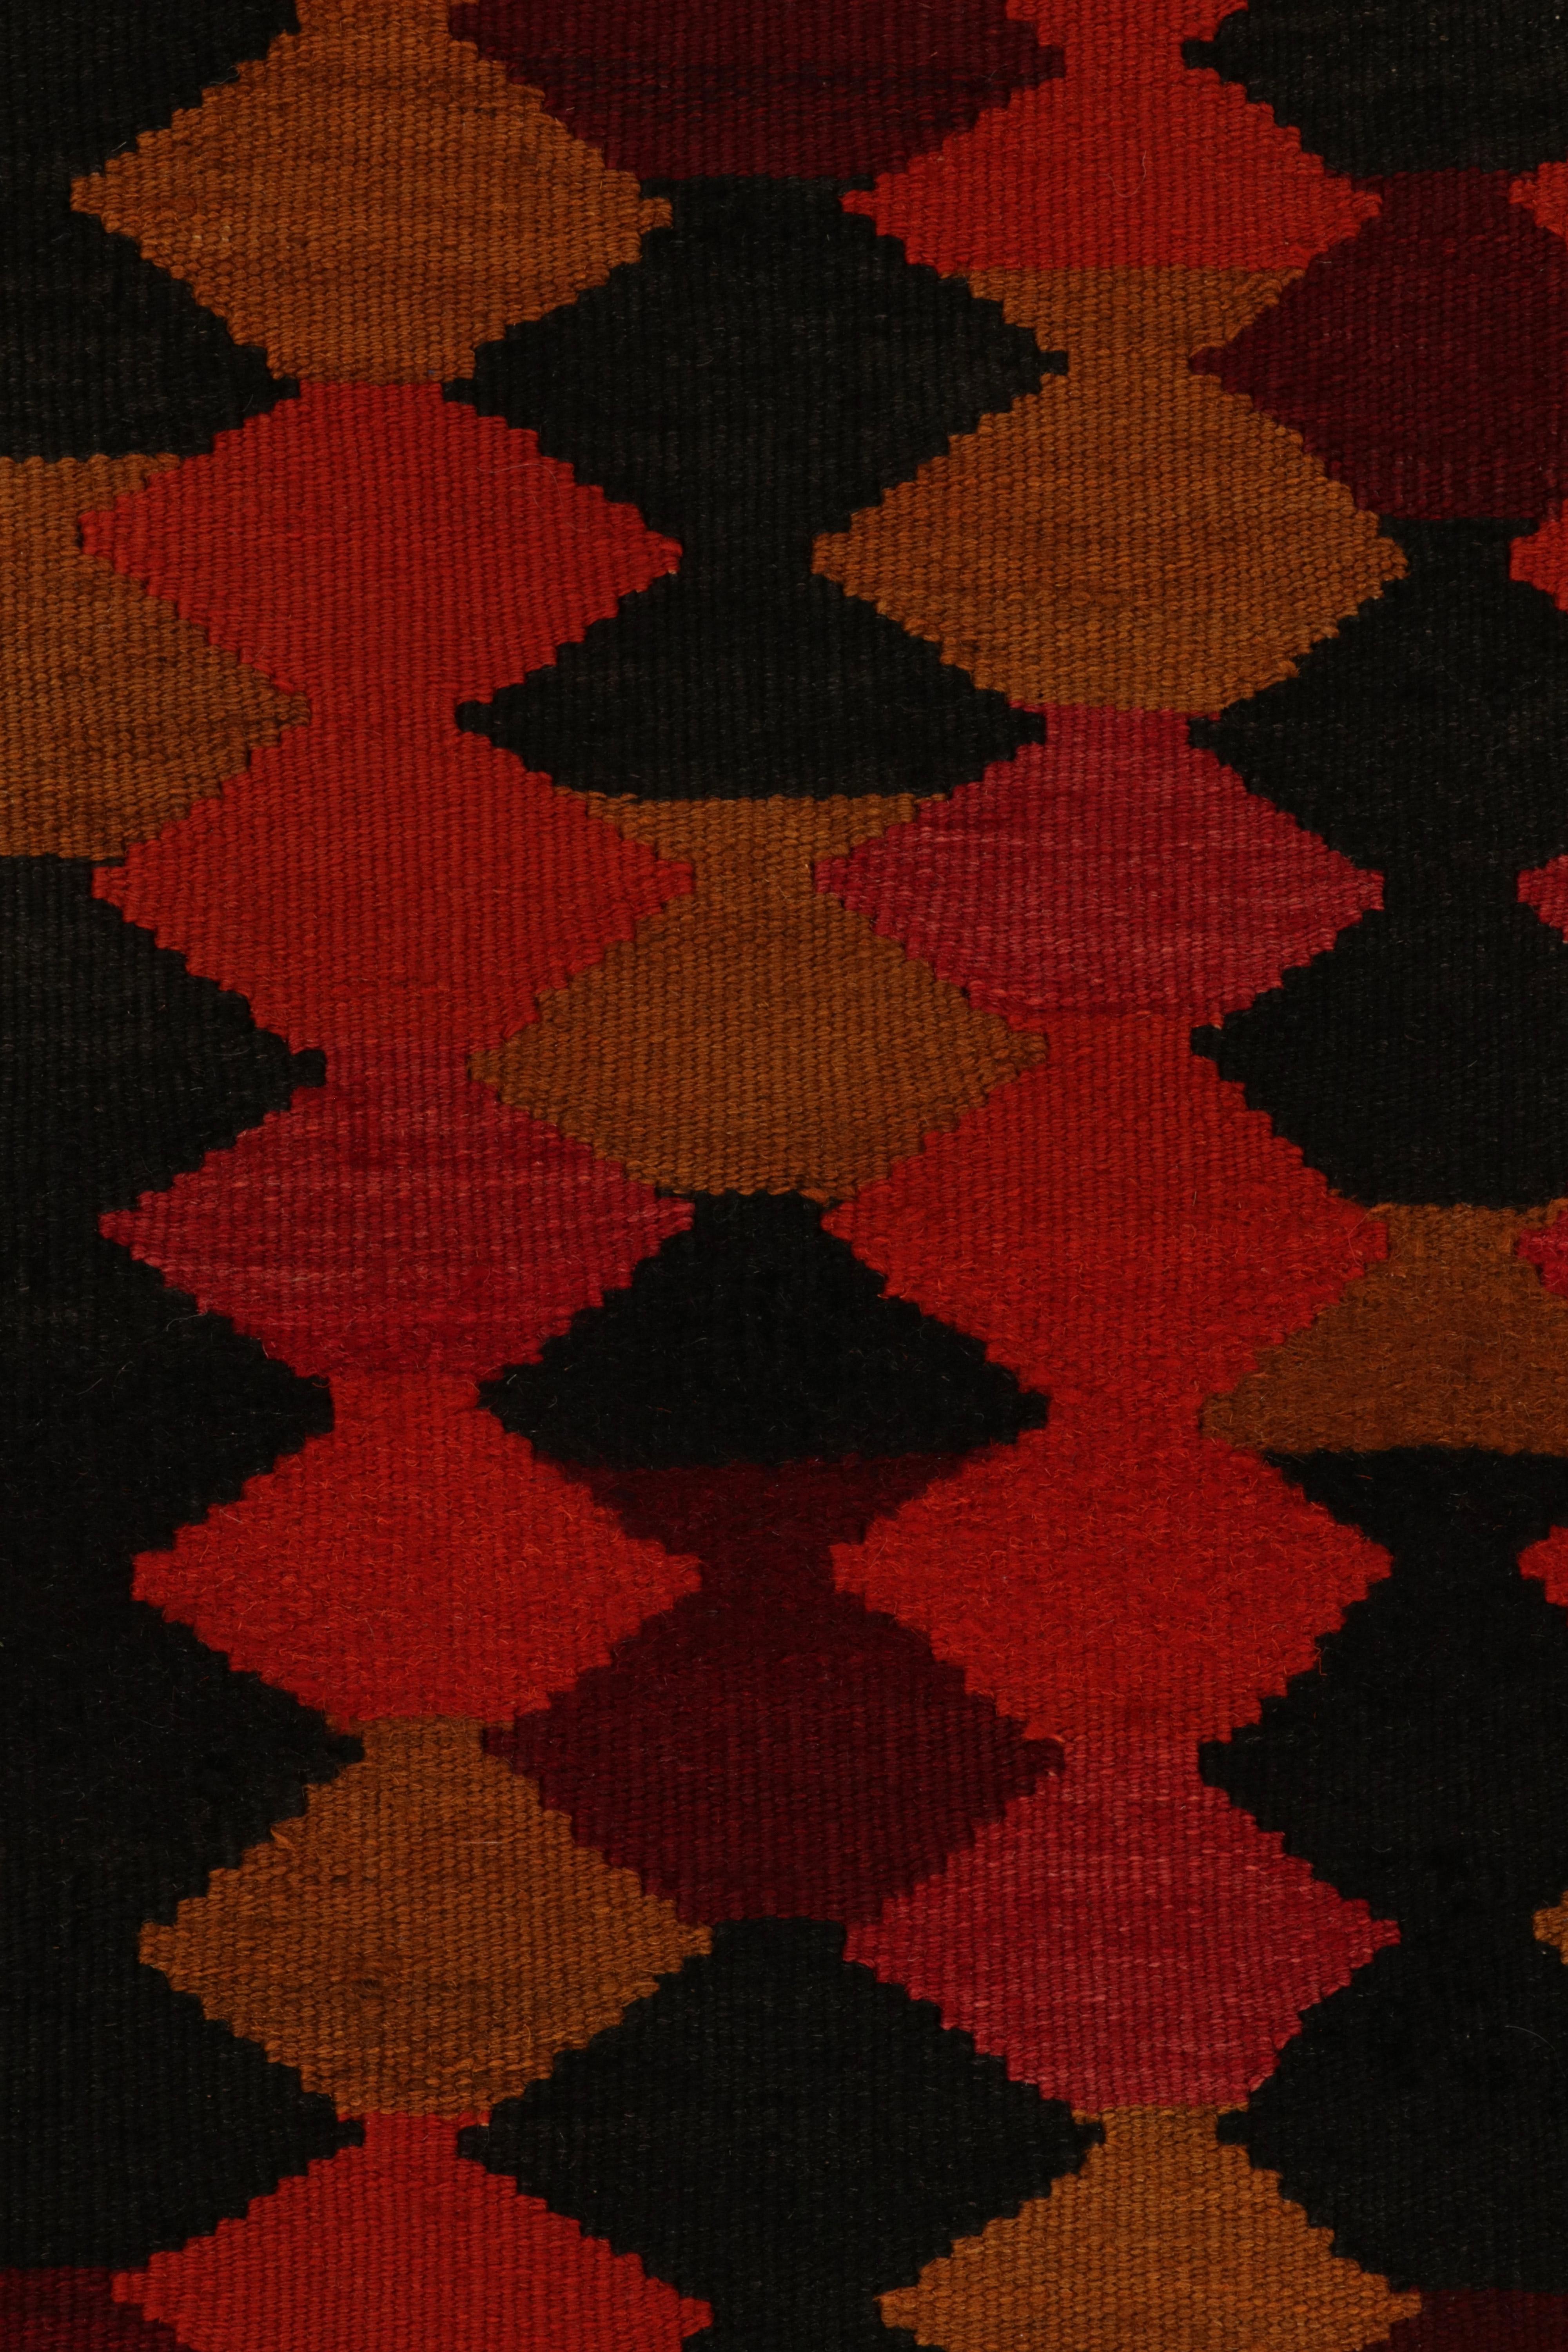 Hand-Knotted 1950s Vintage Kilim Runner in Red, Black Diamond Patterns by Rug & Kilim For Sale